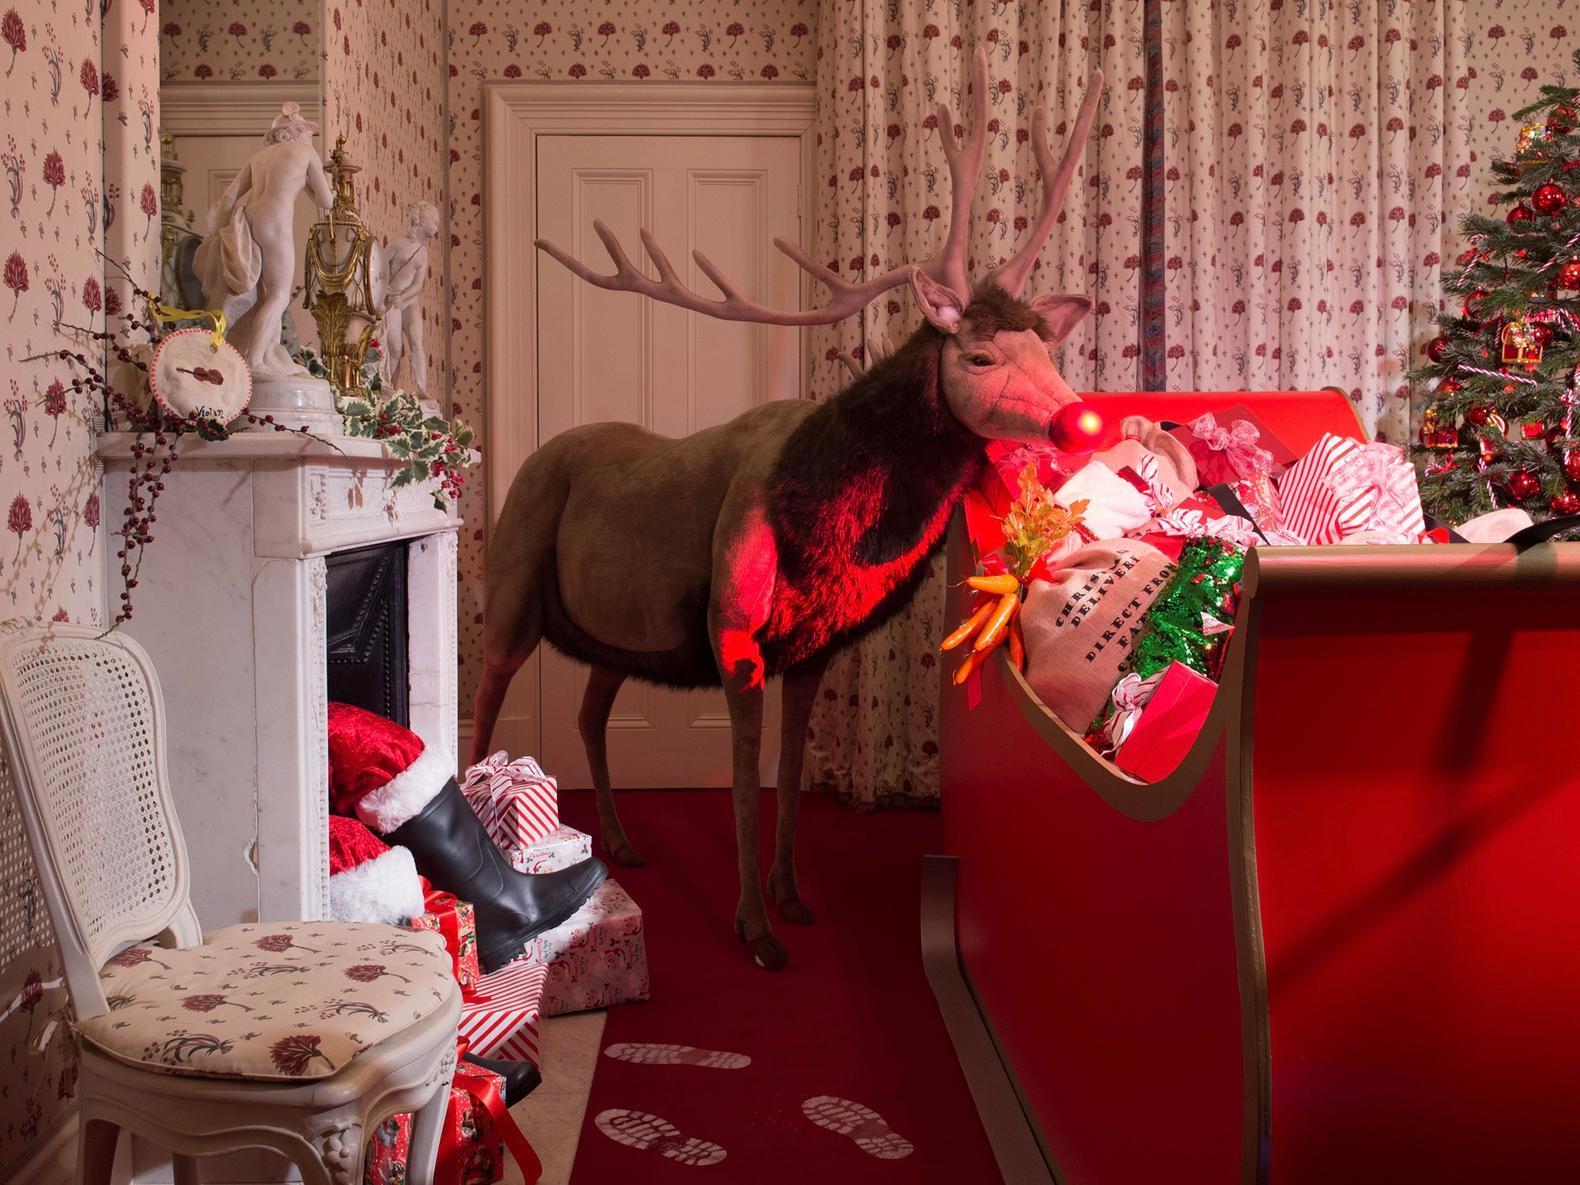 Rudolf is present in this decorated room, and can you spot Santa himself?!